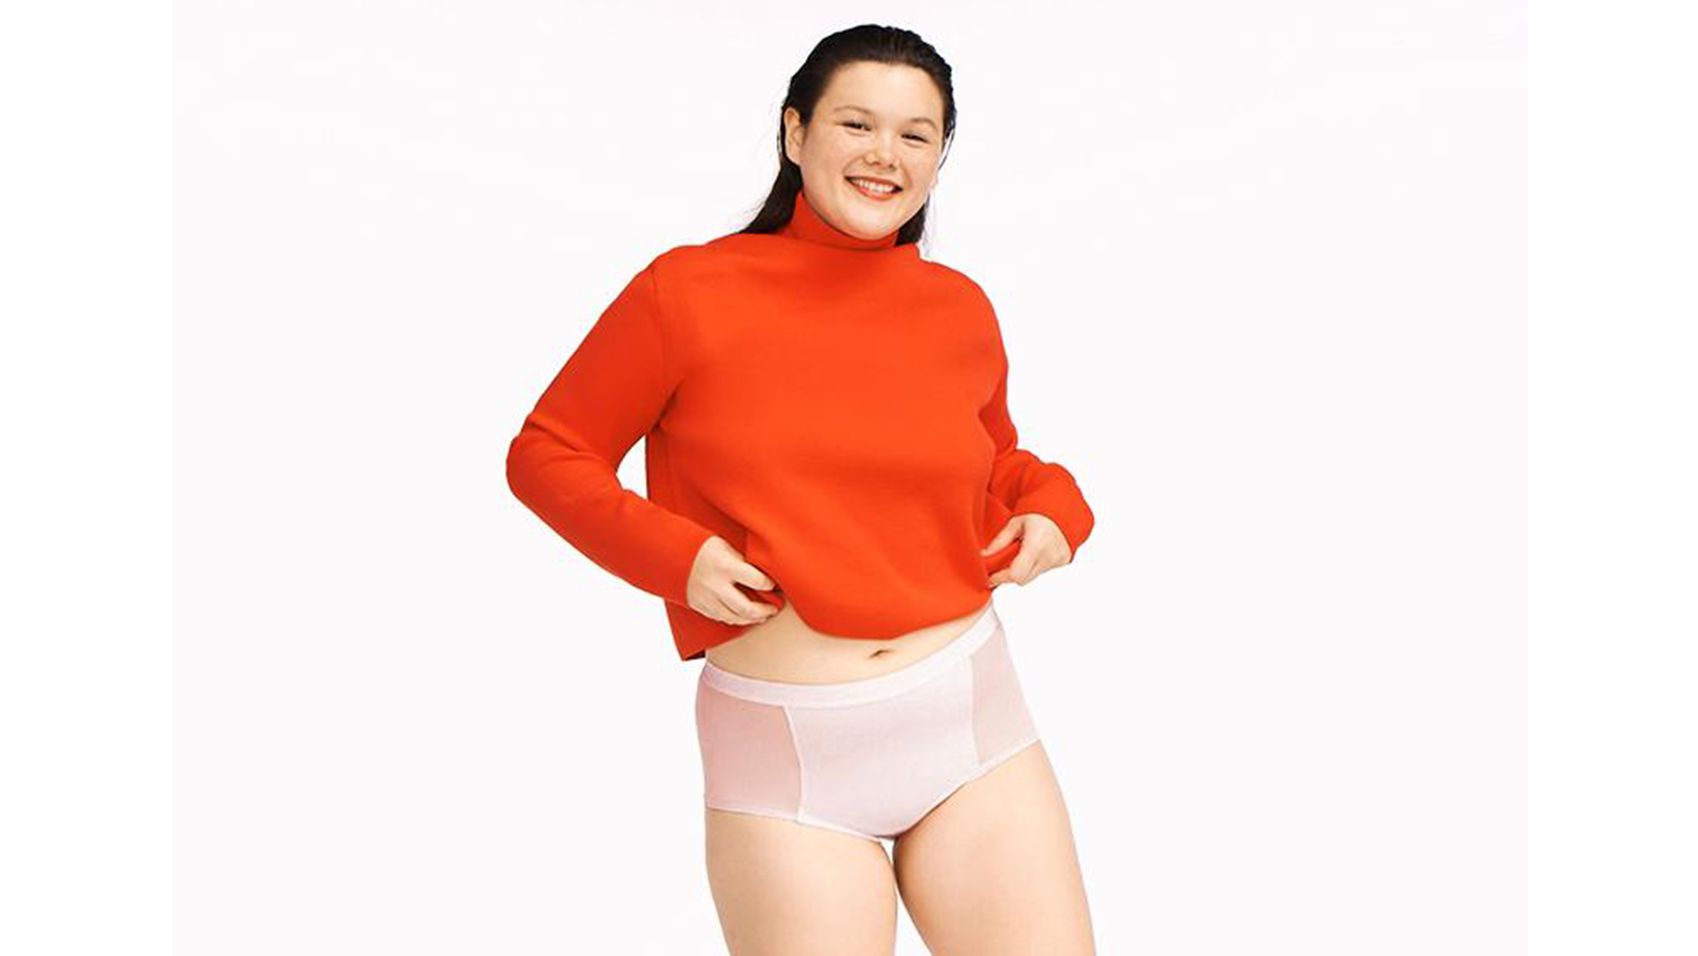 Parade underwear review: We tested the underwear brand loved on Instagram